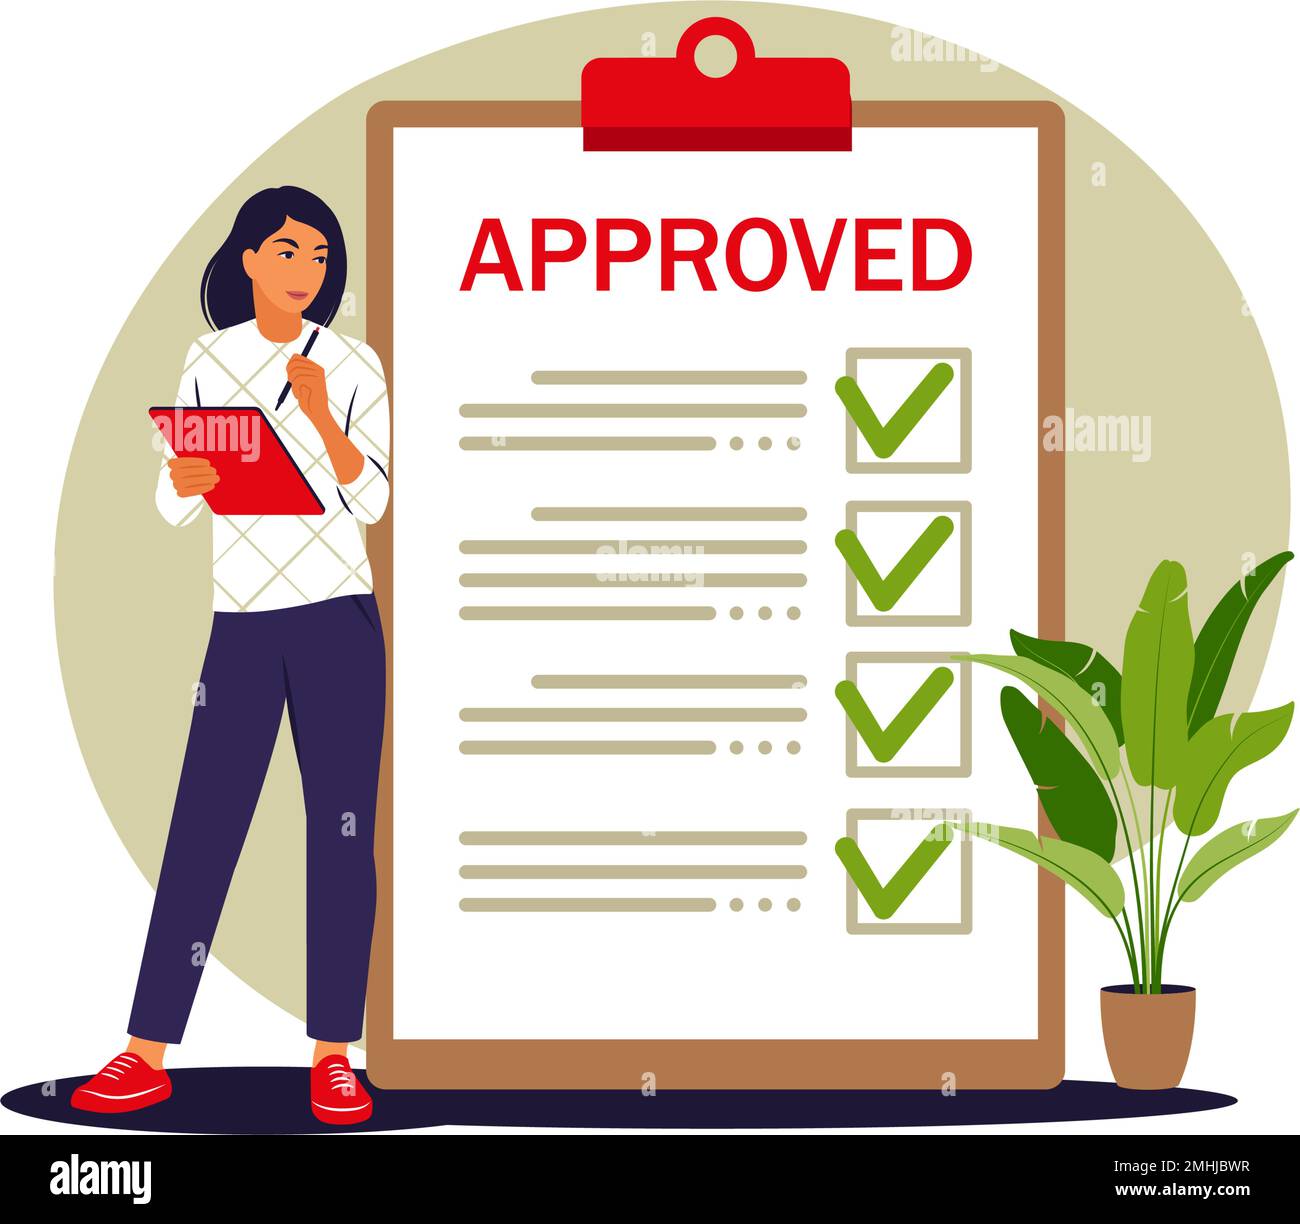 Approval concept. Rating and reviews. Meeting requirements. Vector illustration. Flat. Stock Vector